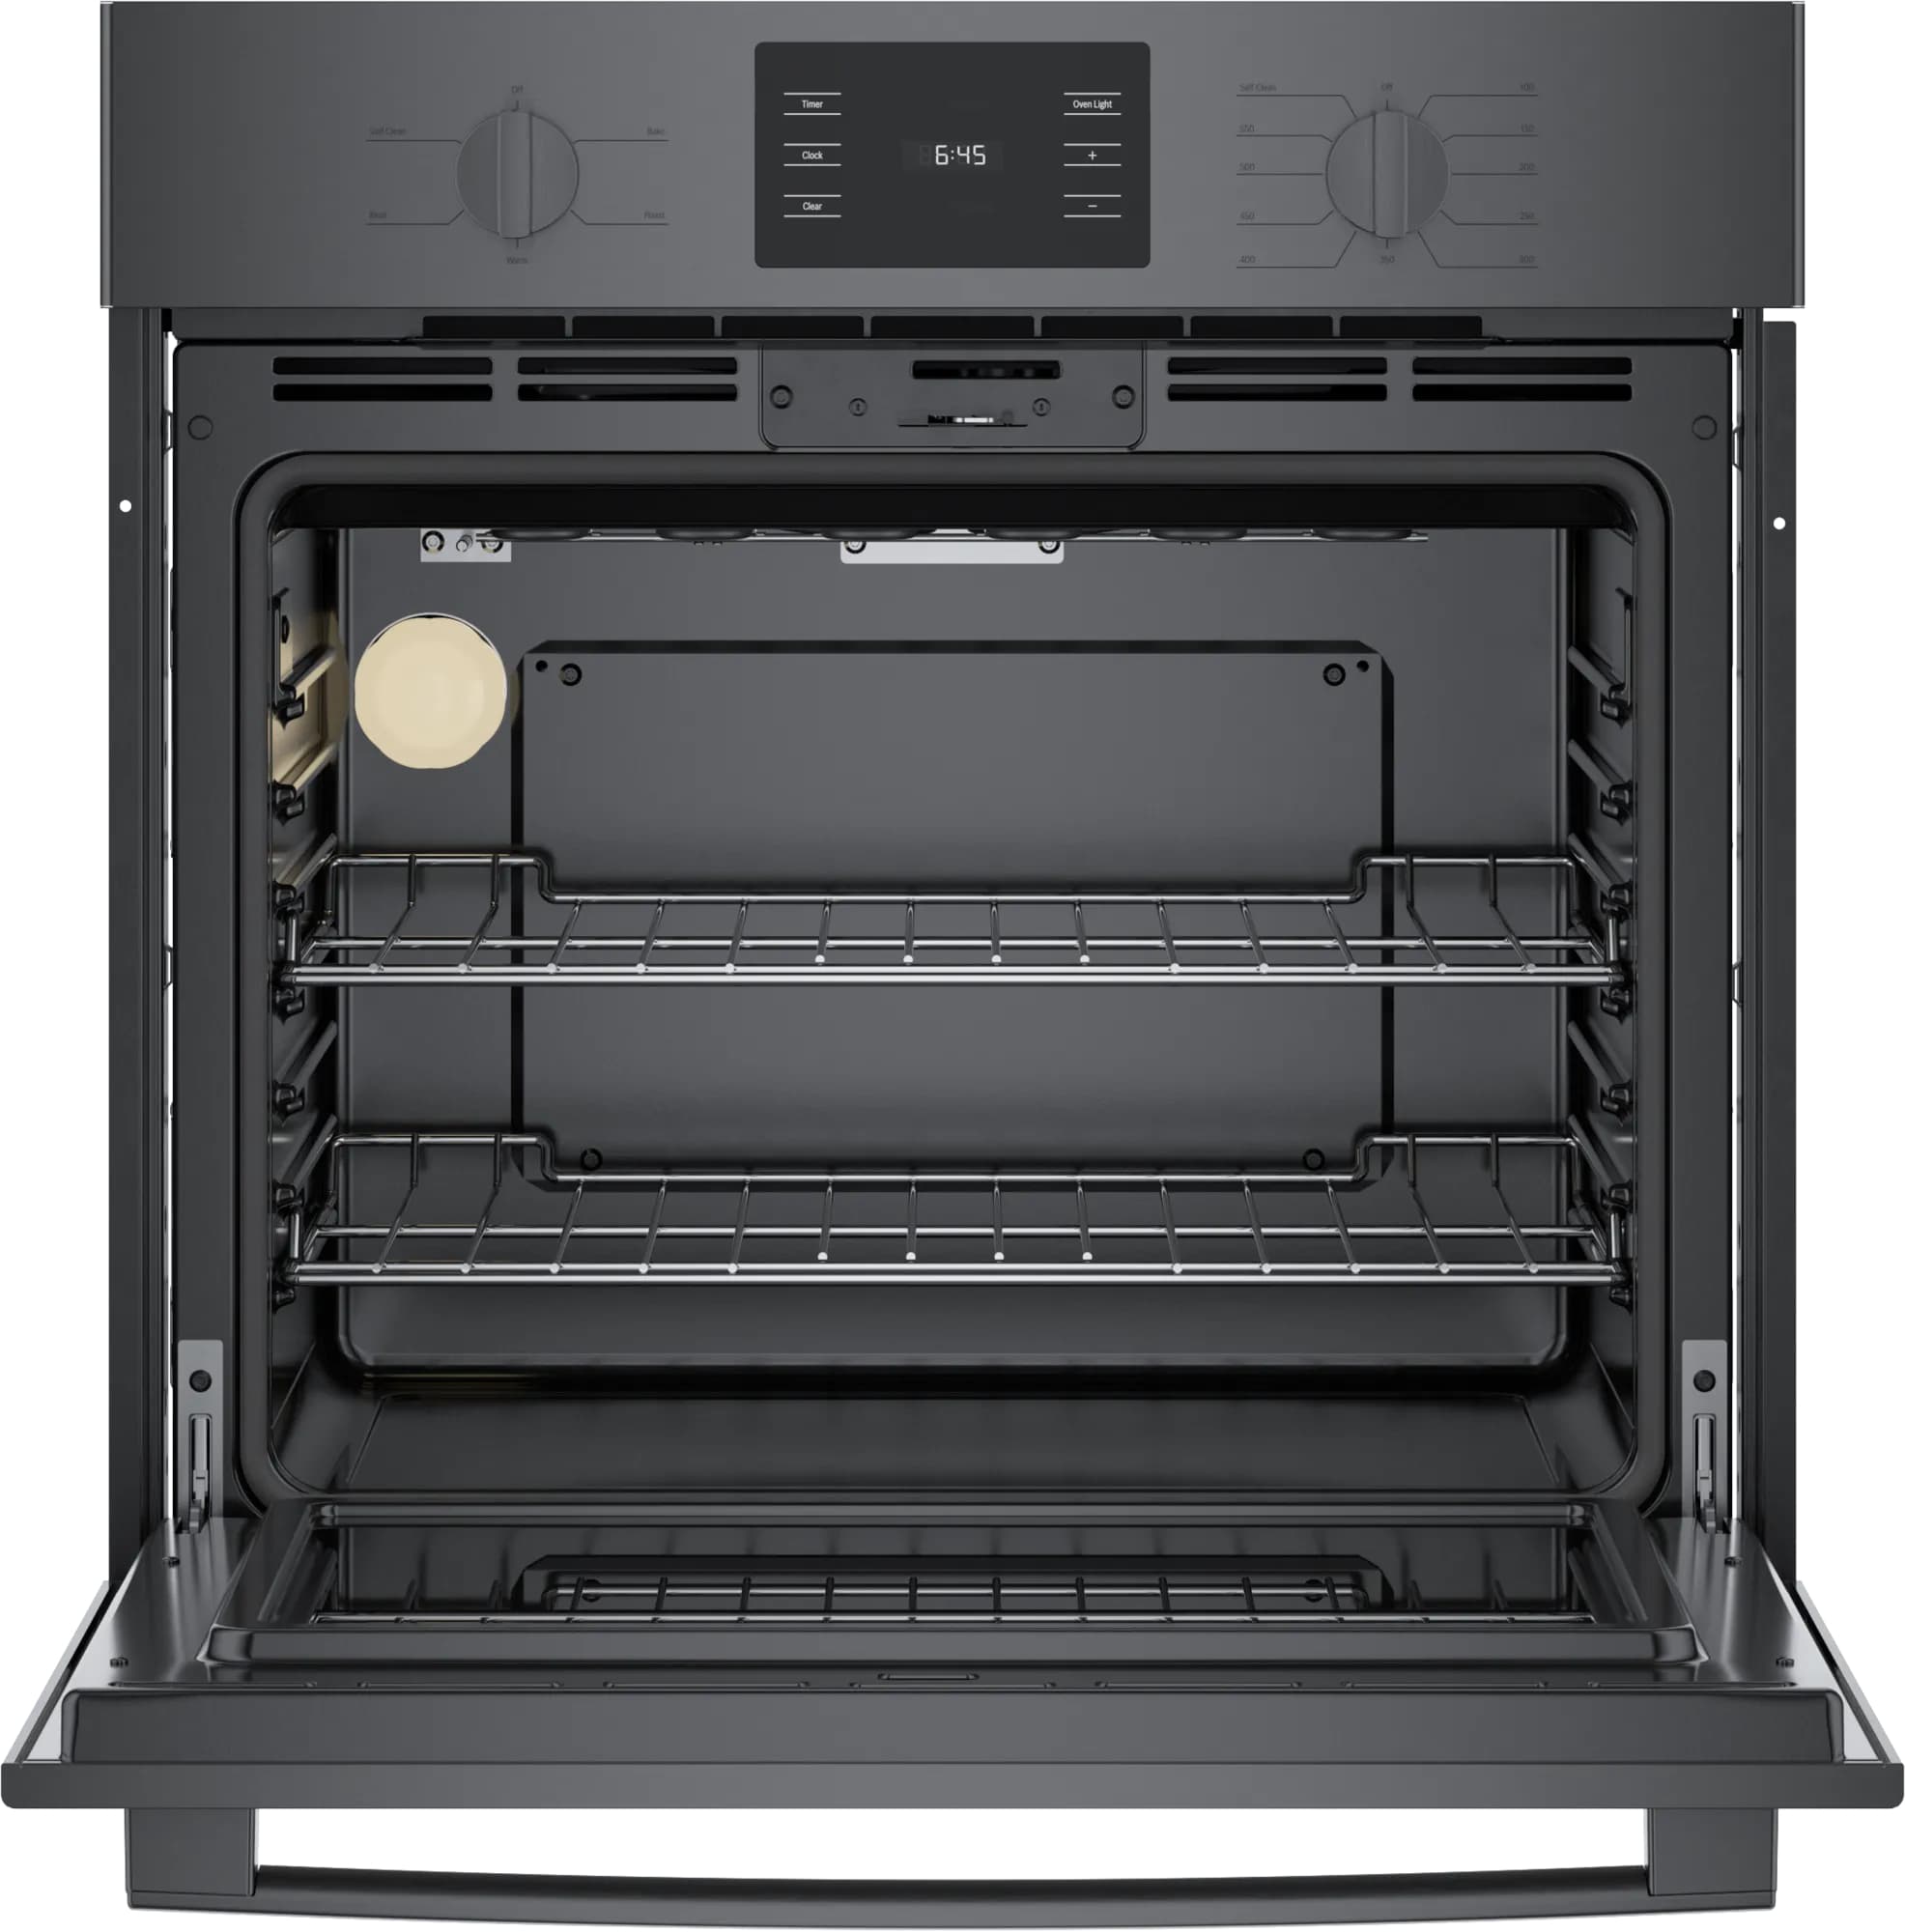 Bosch - 4.6 cu. ft Single Wall Oven in Black Stainless - HBL5344UC